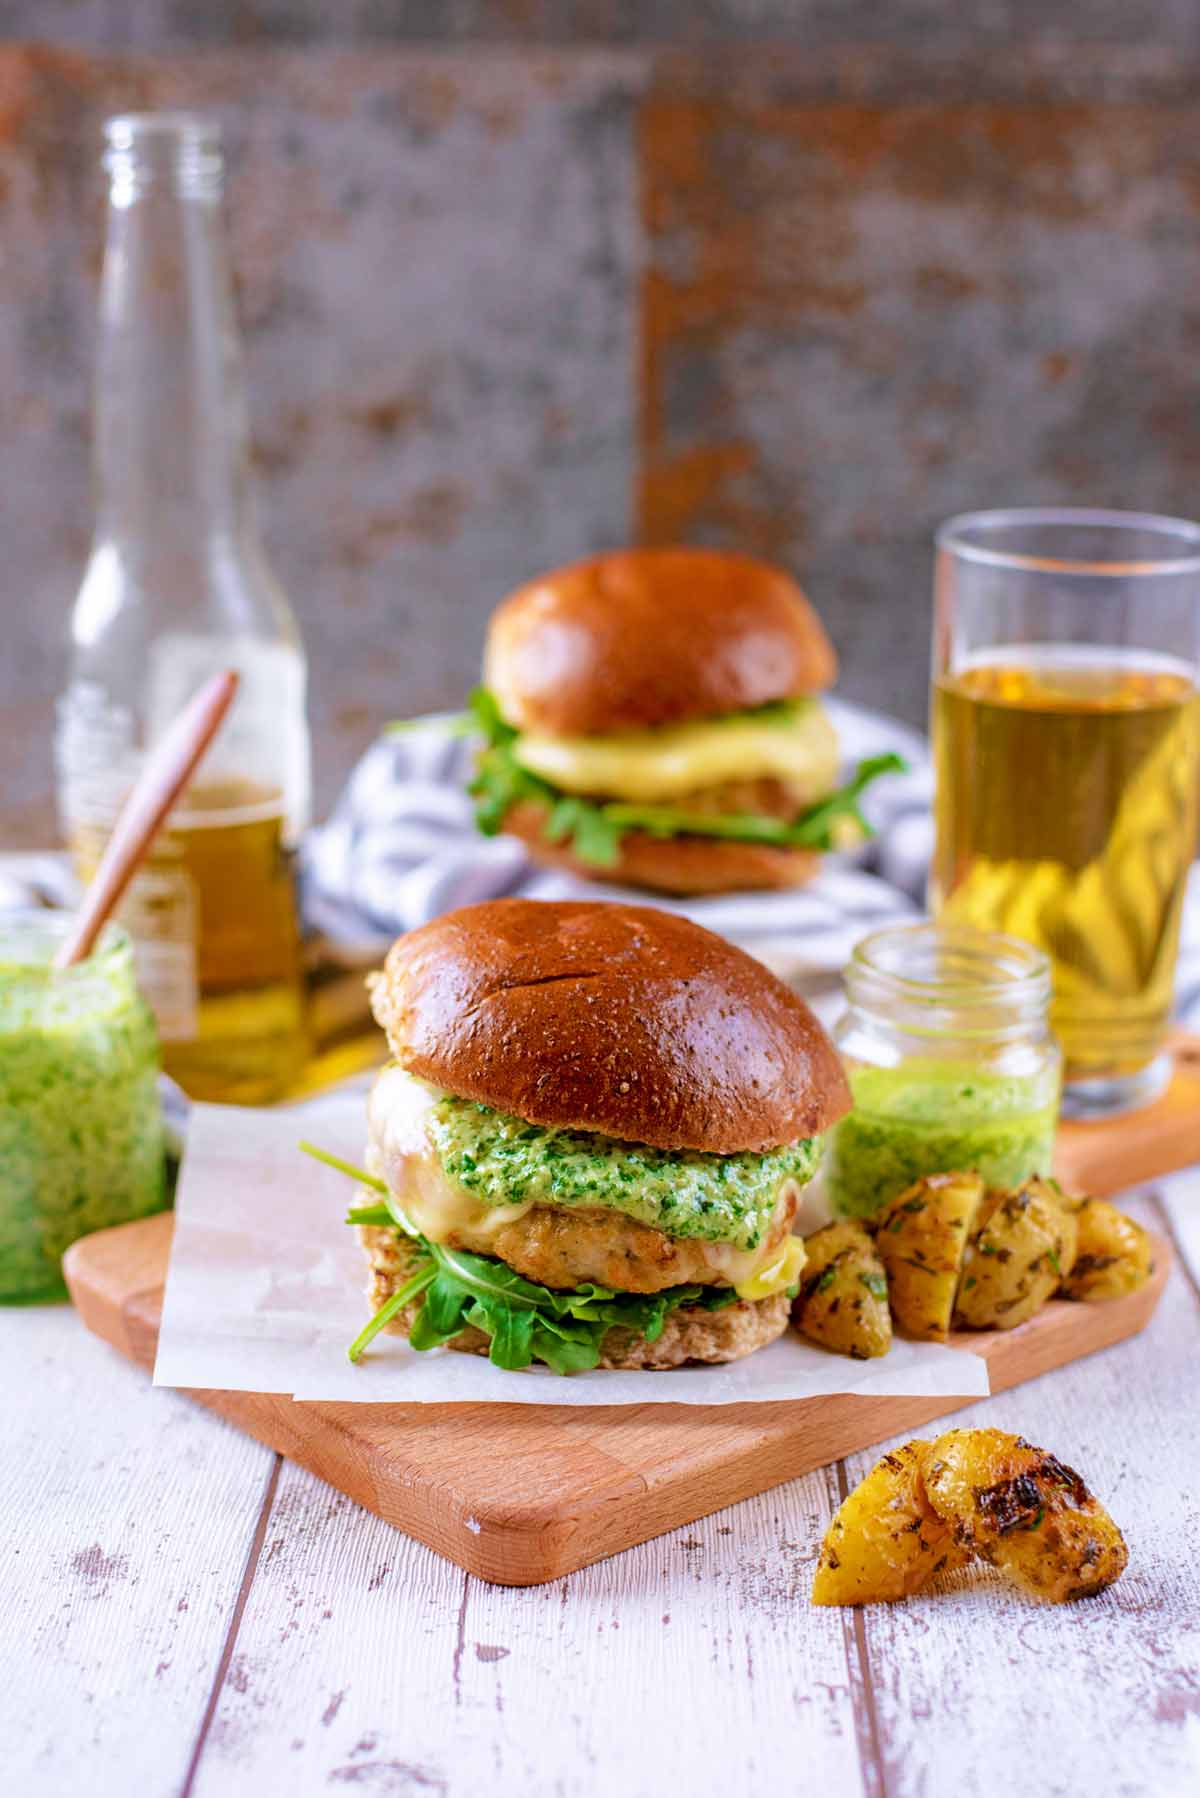 Two chicken burgers with a bottle of beer and jars of pesto.